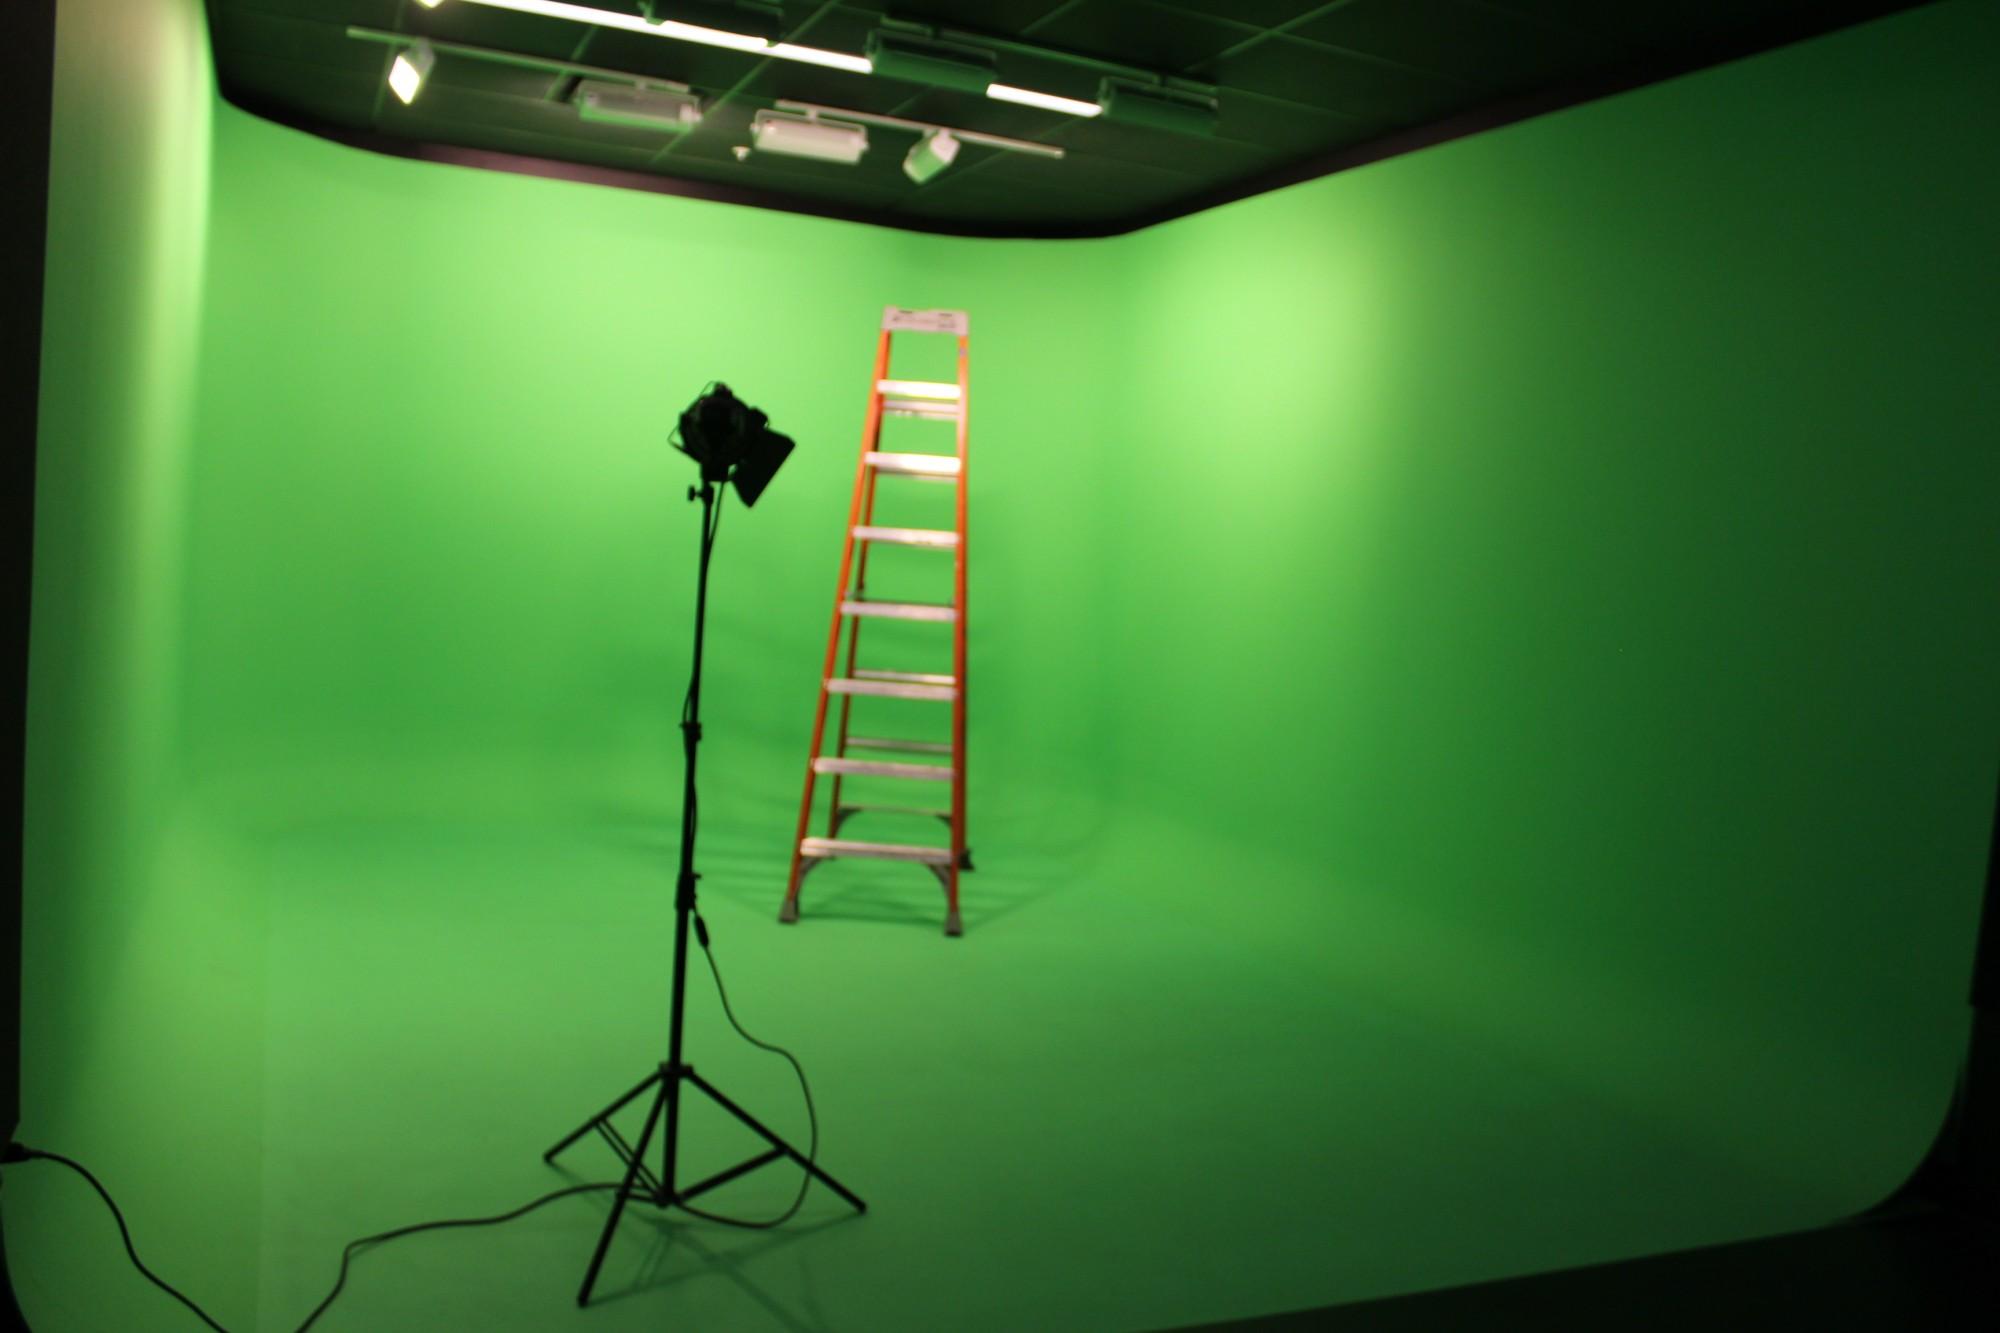  A green room located at the CATalyst studio where it can eventually be used for students who are want to produce  videos.